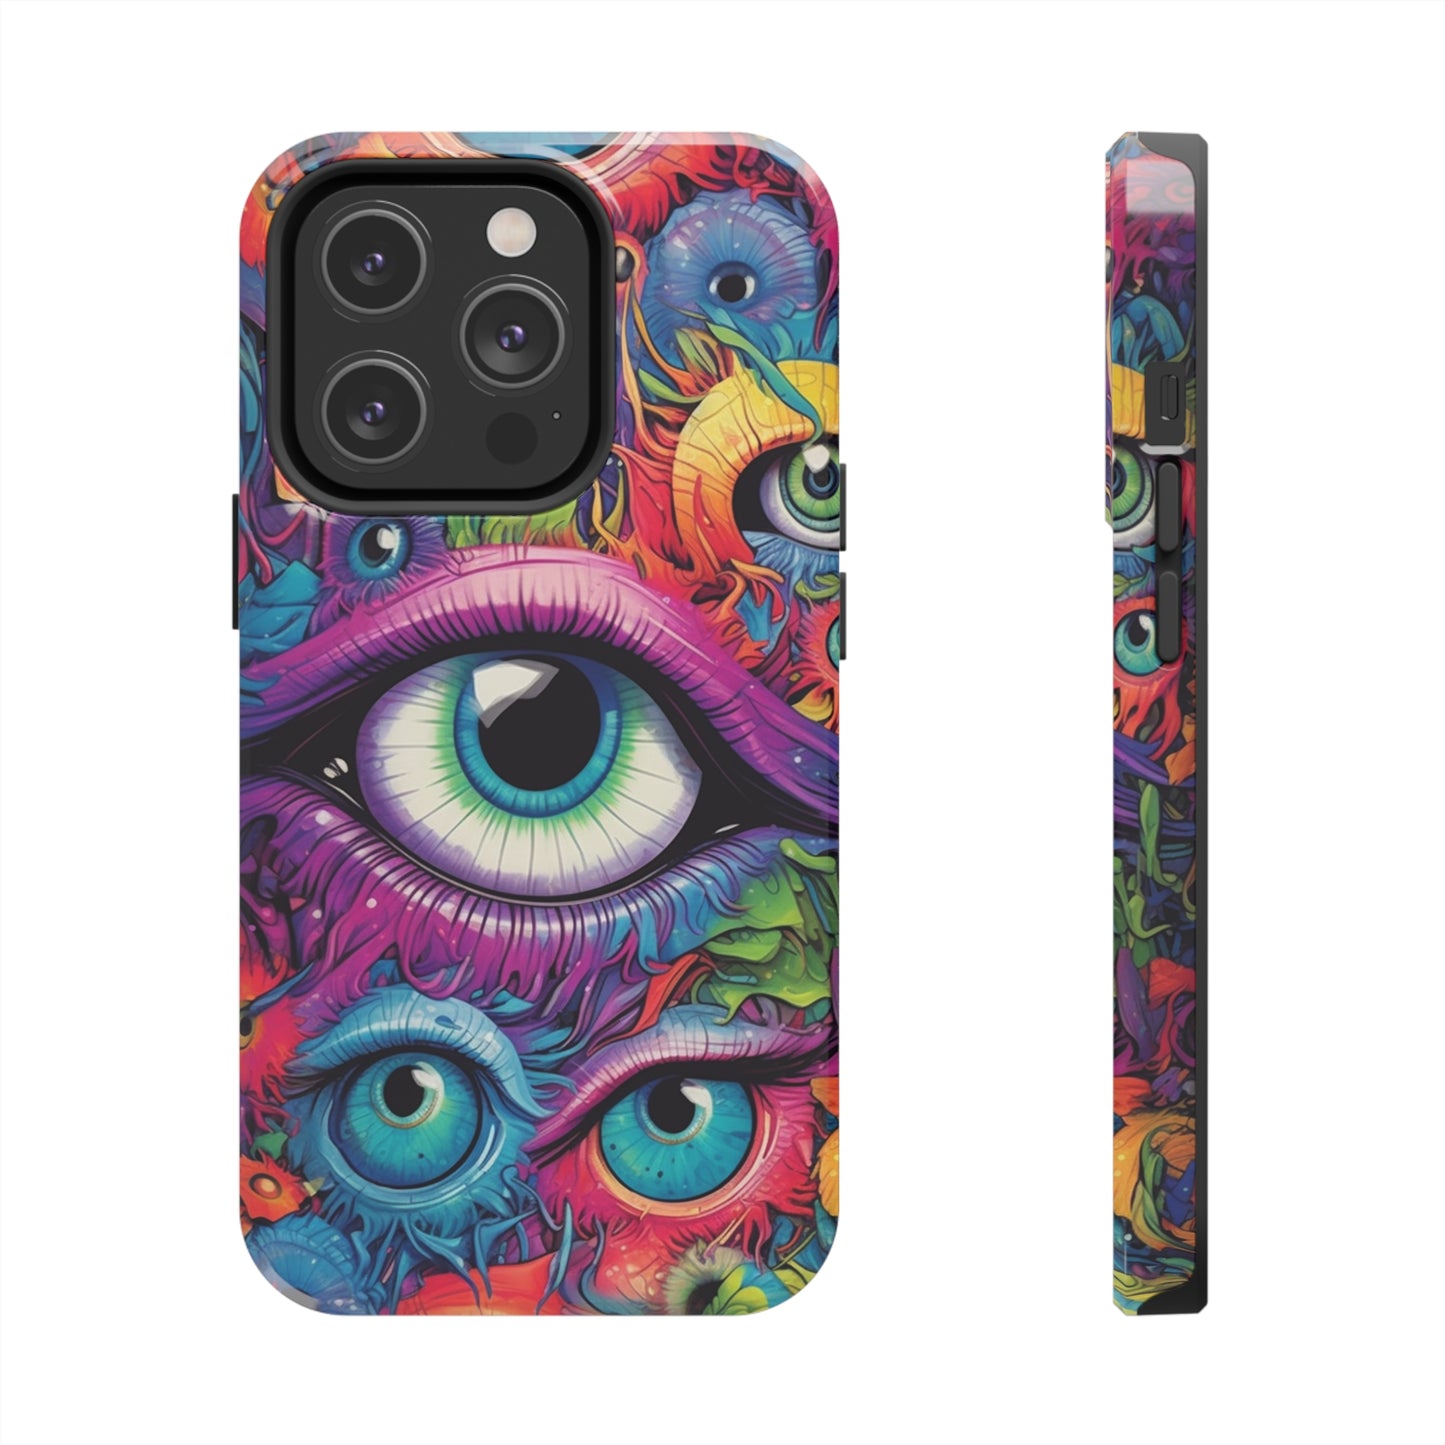 Eye-Catching iPhone Protective Case for Unique Style